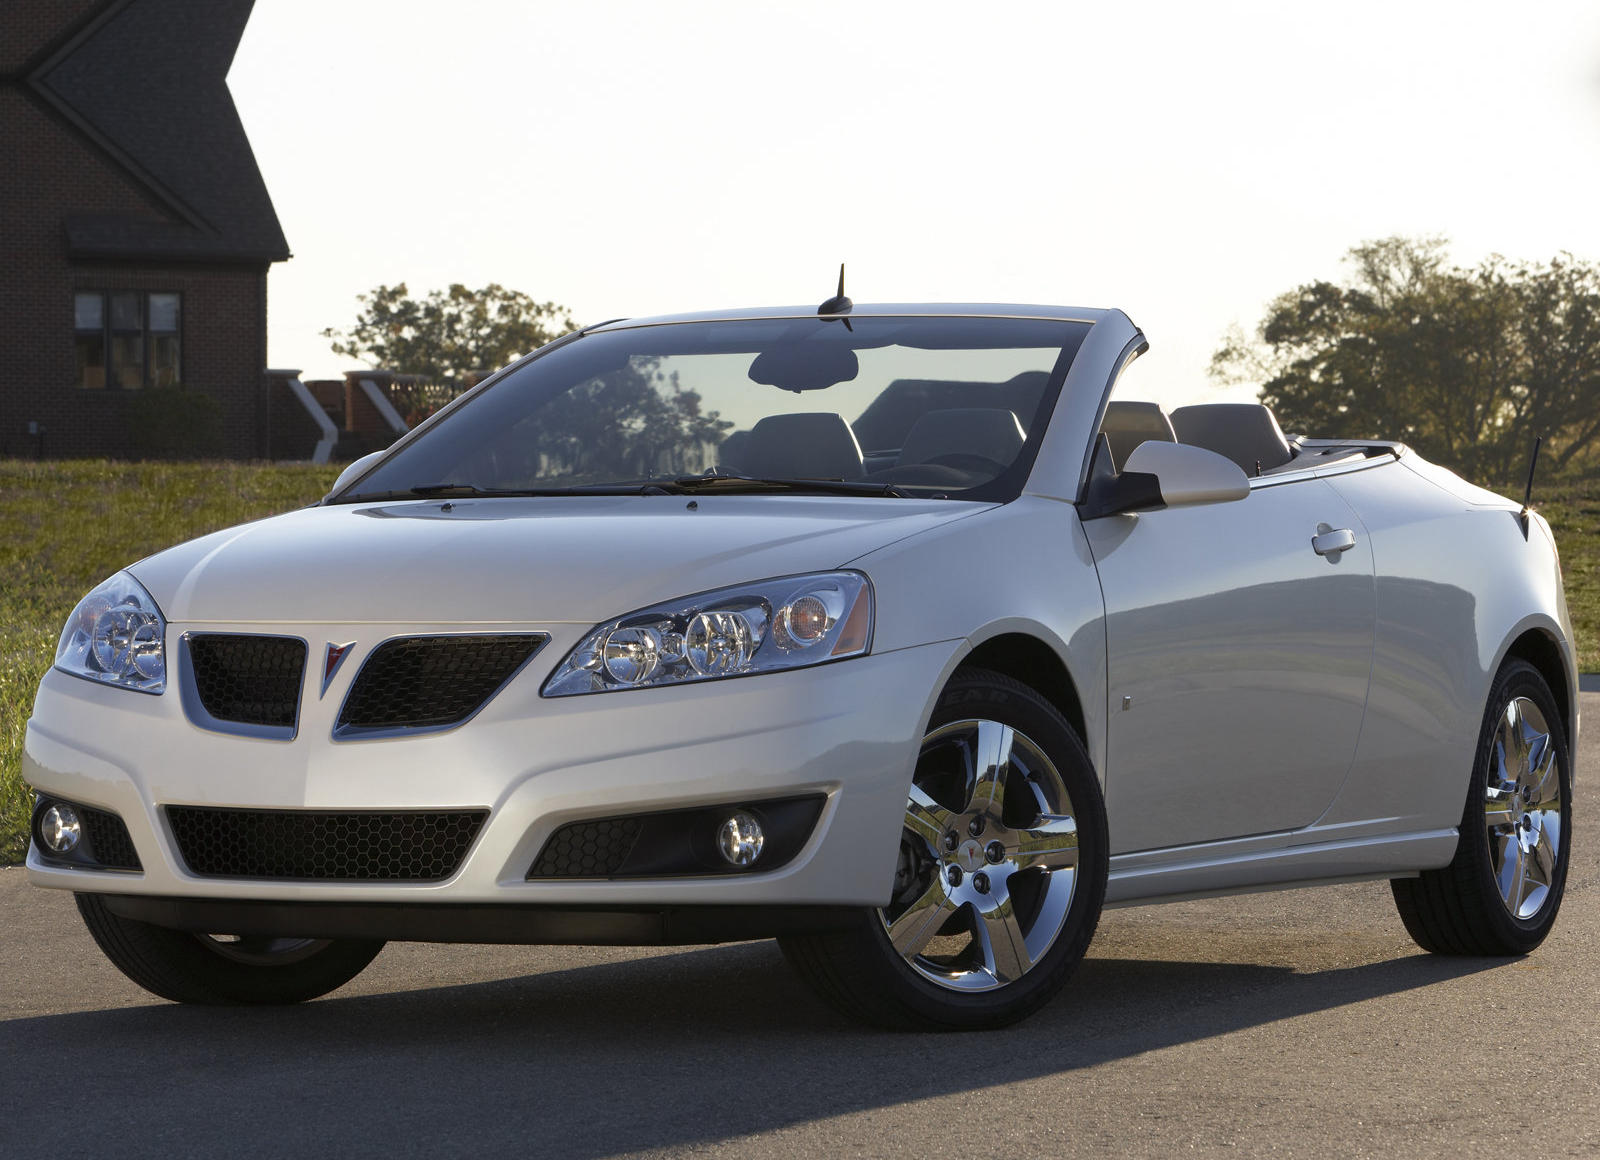 2008 Pontiac G6 Convertible Front Angle View